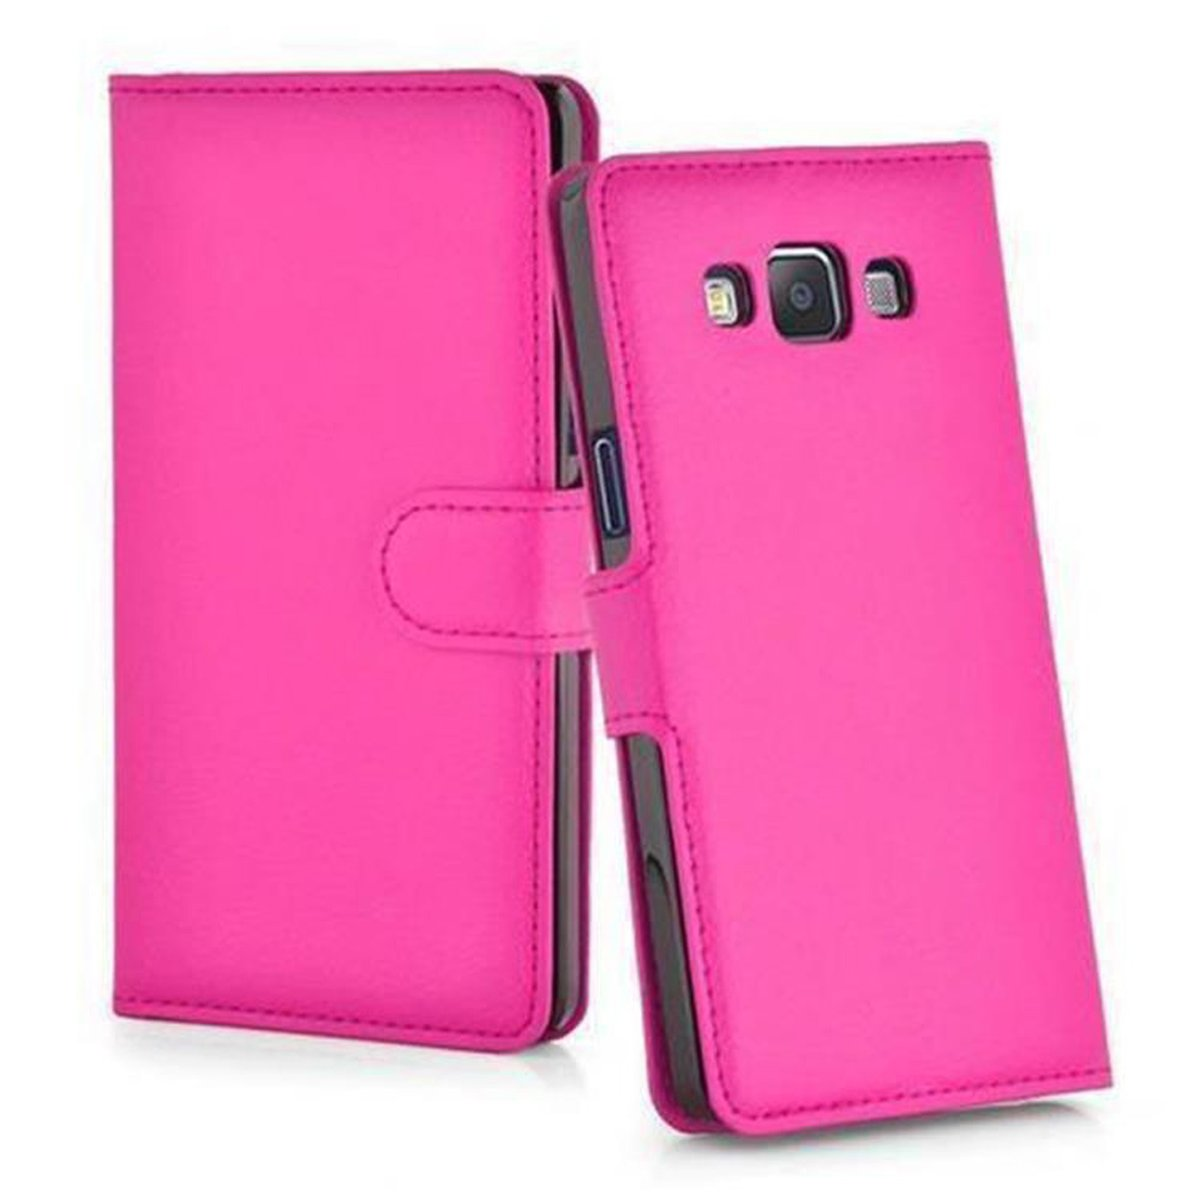 Samsung, 2015, Hülle CADORABO Standfunktion, Book Bookcover, PINK CHERRY A7 Galaxy